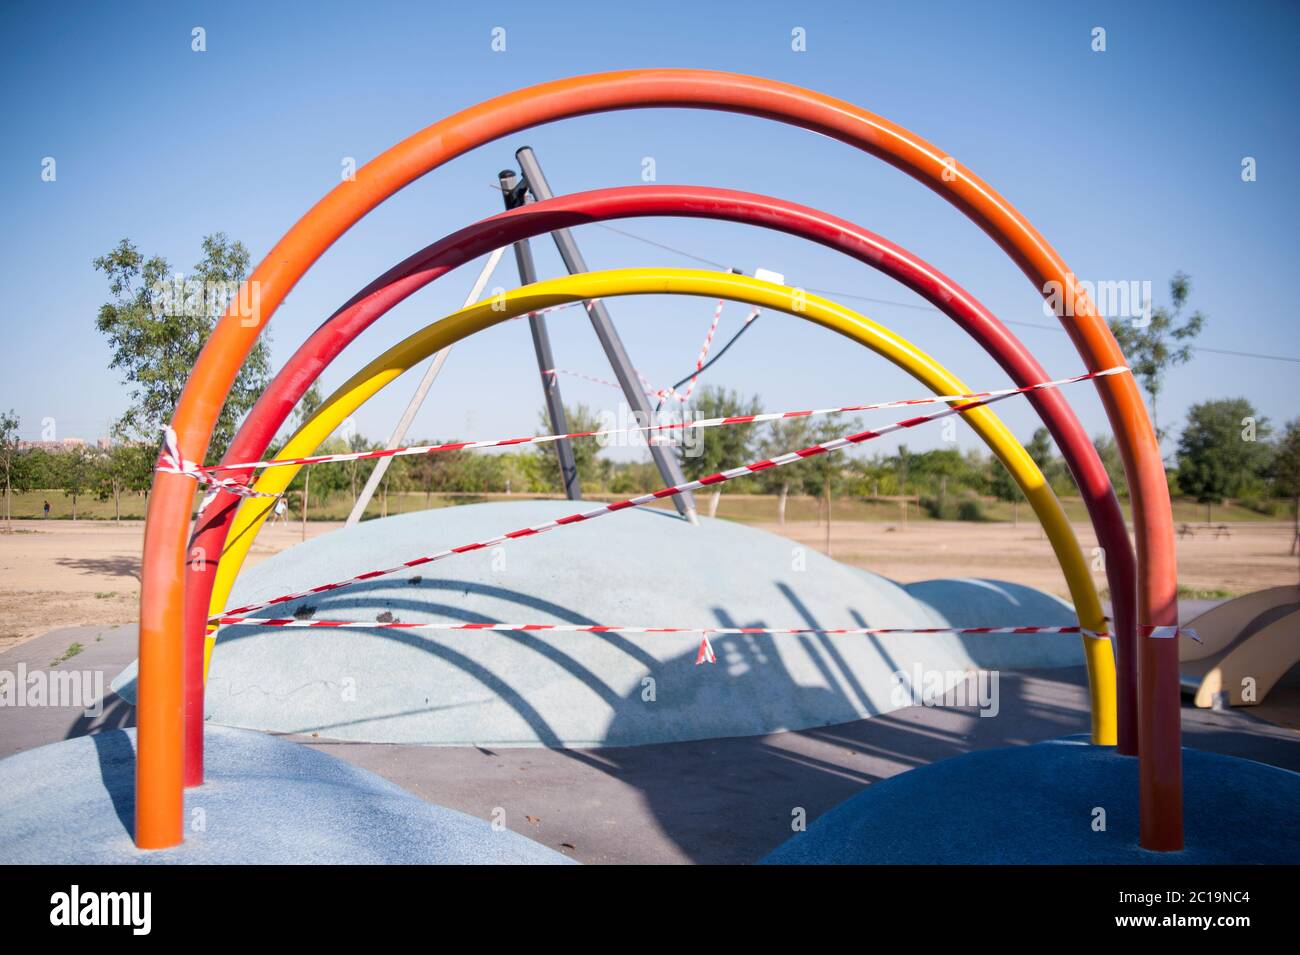 SPAIN, Seville: Life under quarantine during Corona Virus outbreak. Playgrounds for children and open air fitness places have been red taped since the Stock Photo